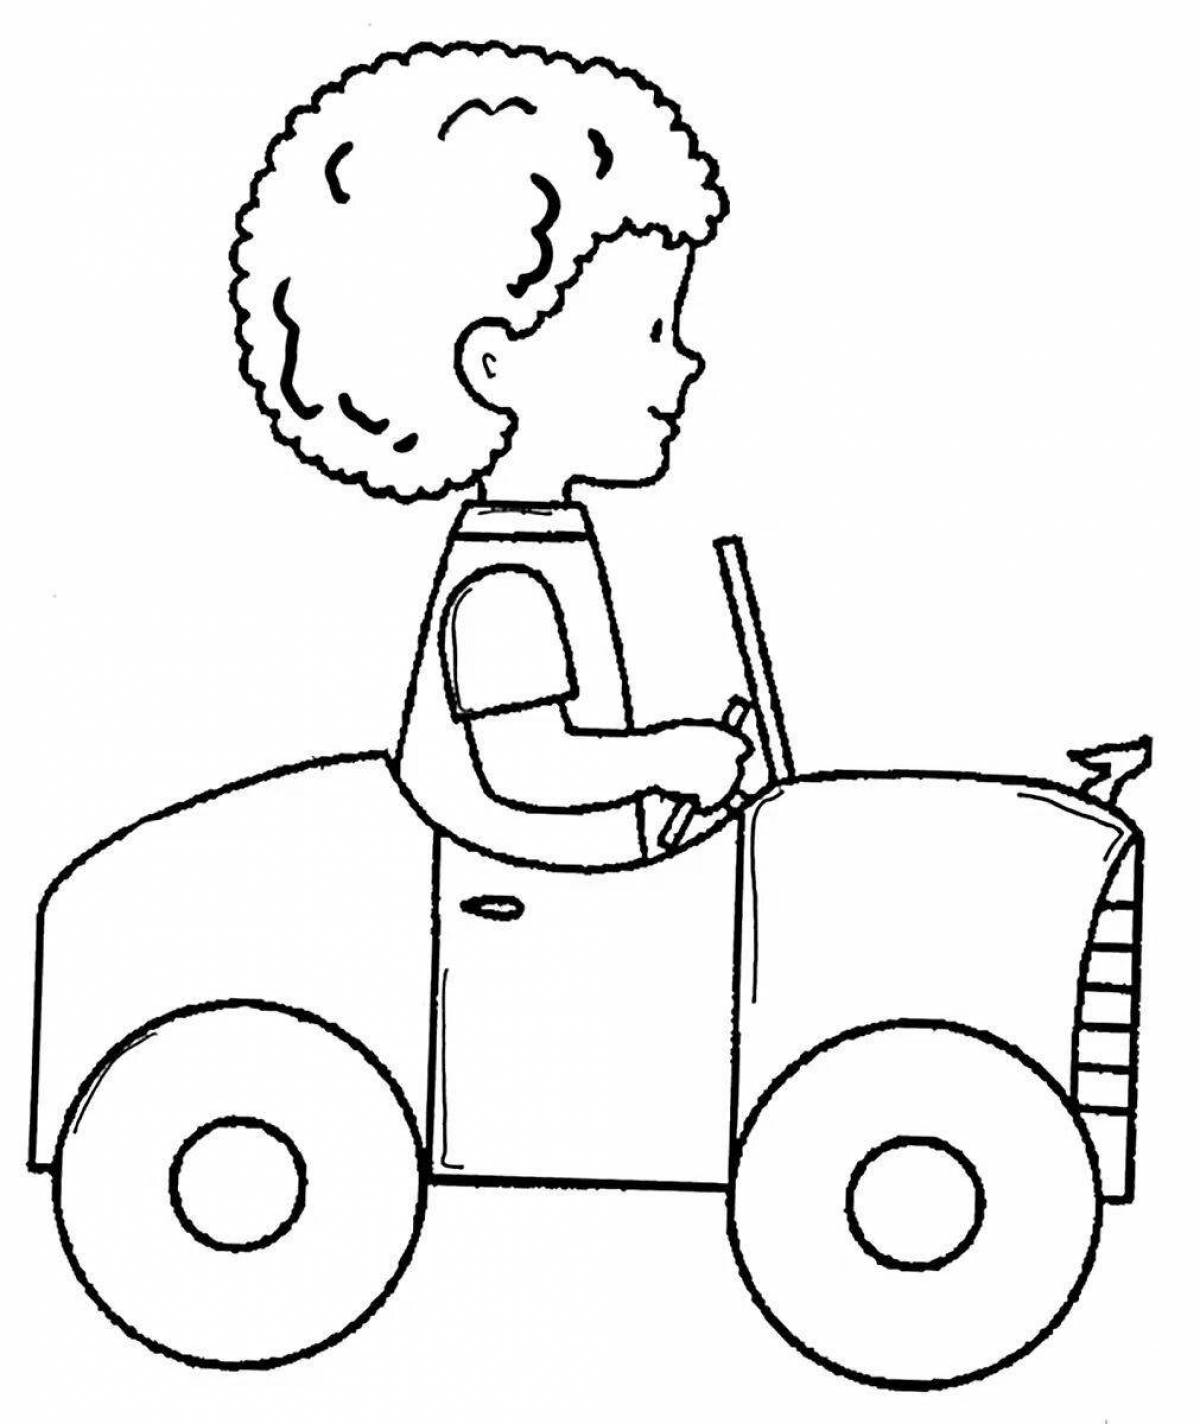 Coloring page energetic driver